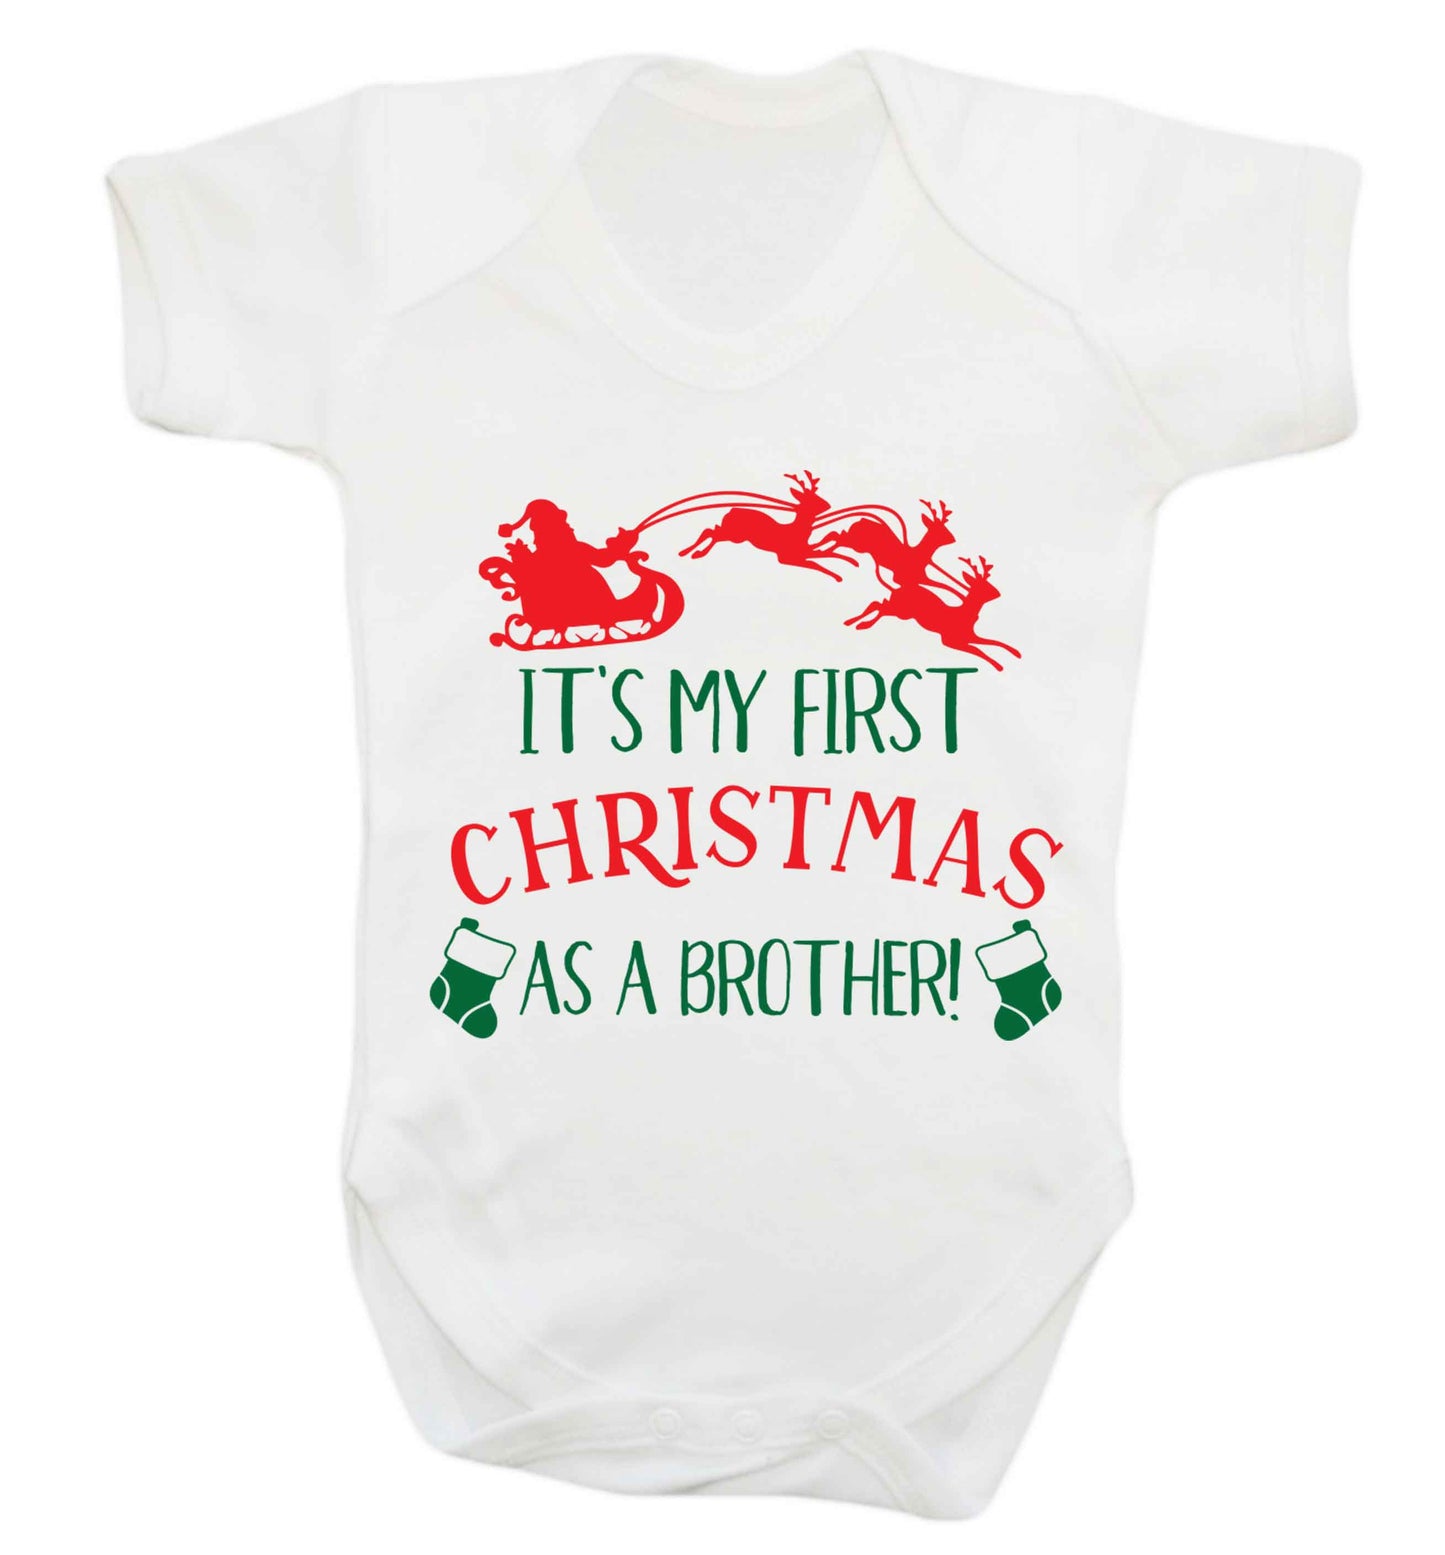 It's my first Christmas as a brother! Baby Vest white 18-24 months